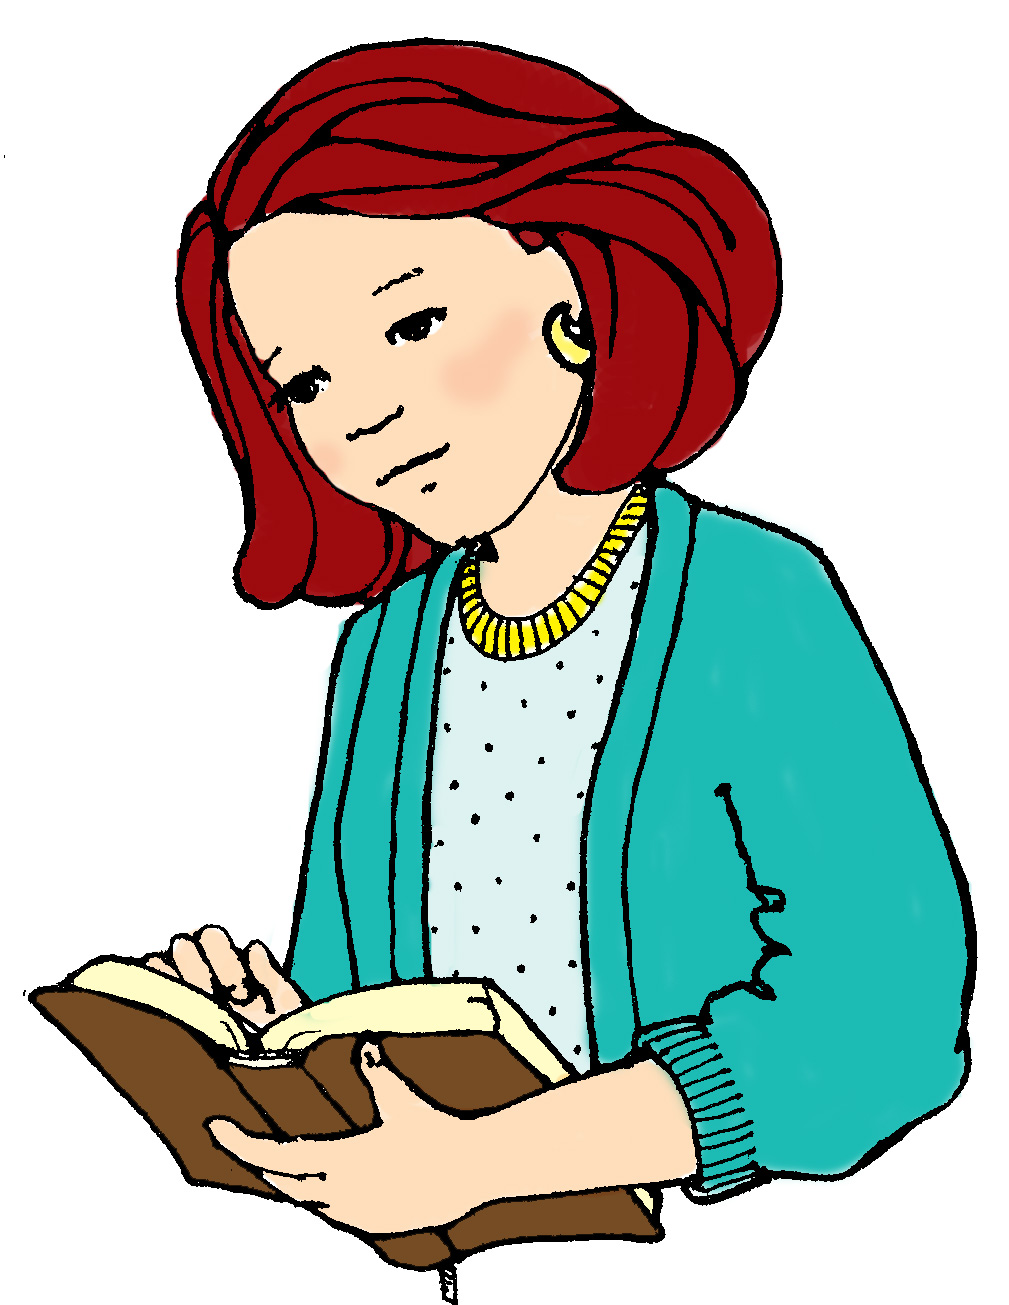 young-woman-with-scriptures.jpg - ClipArt Best - ClipArt Best